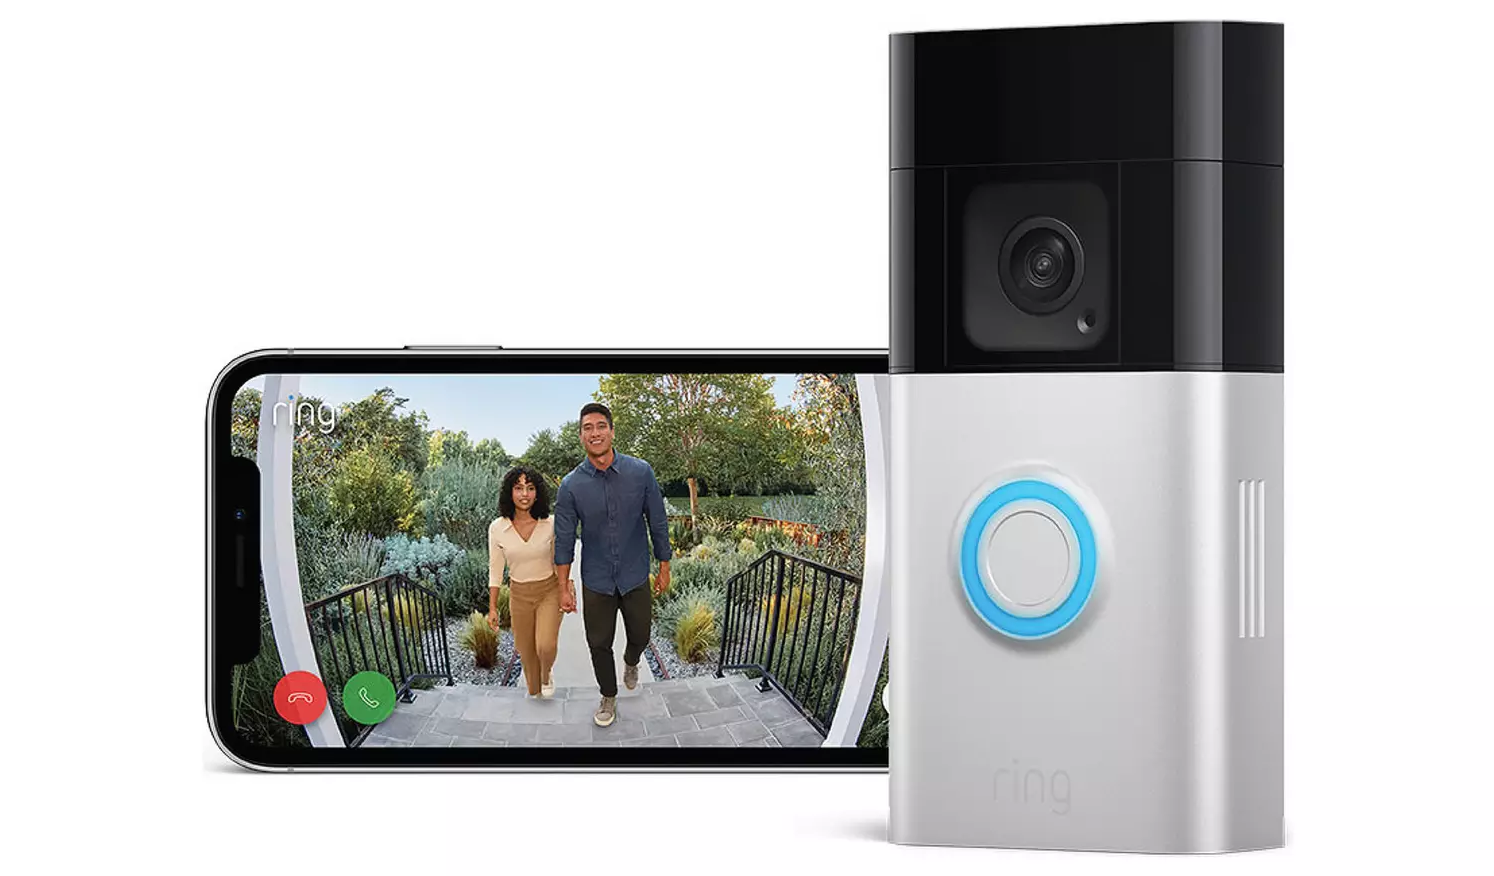 Want to improve the image quality on your Ring Doorbell? Try this! 